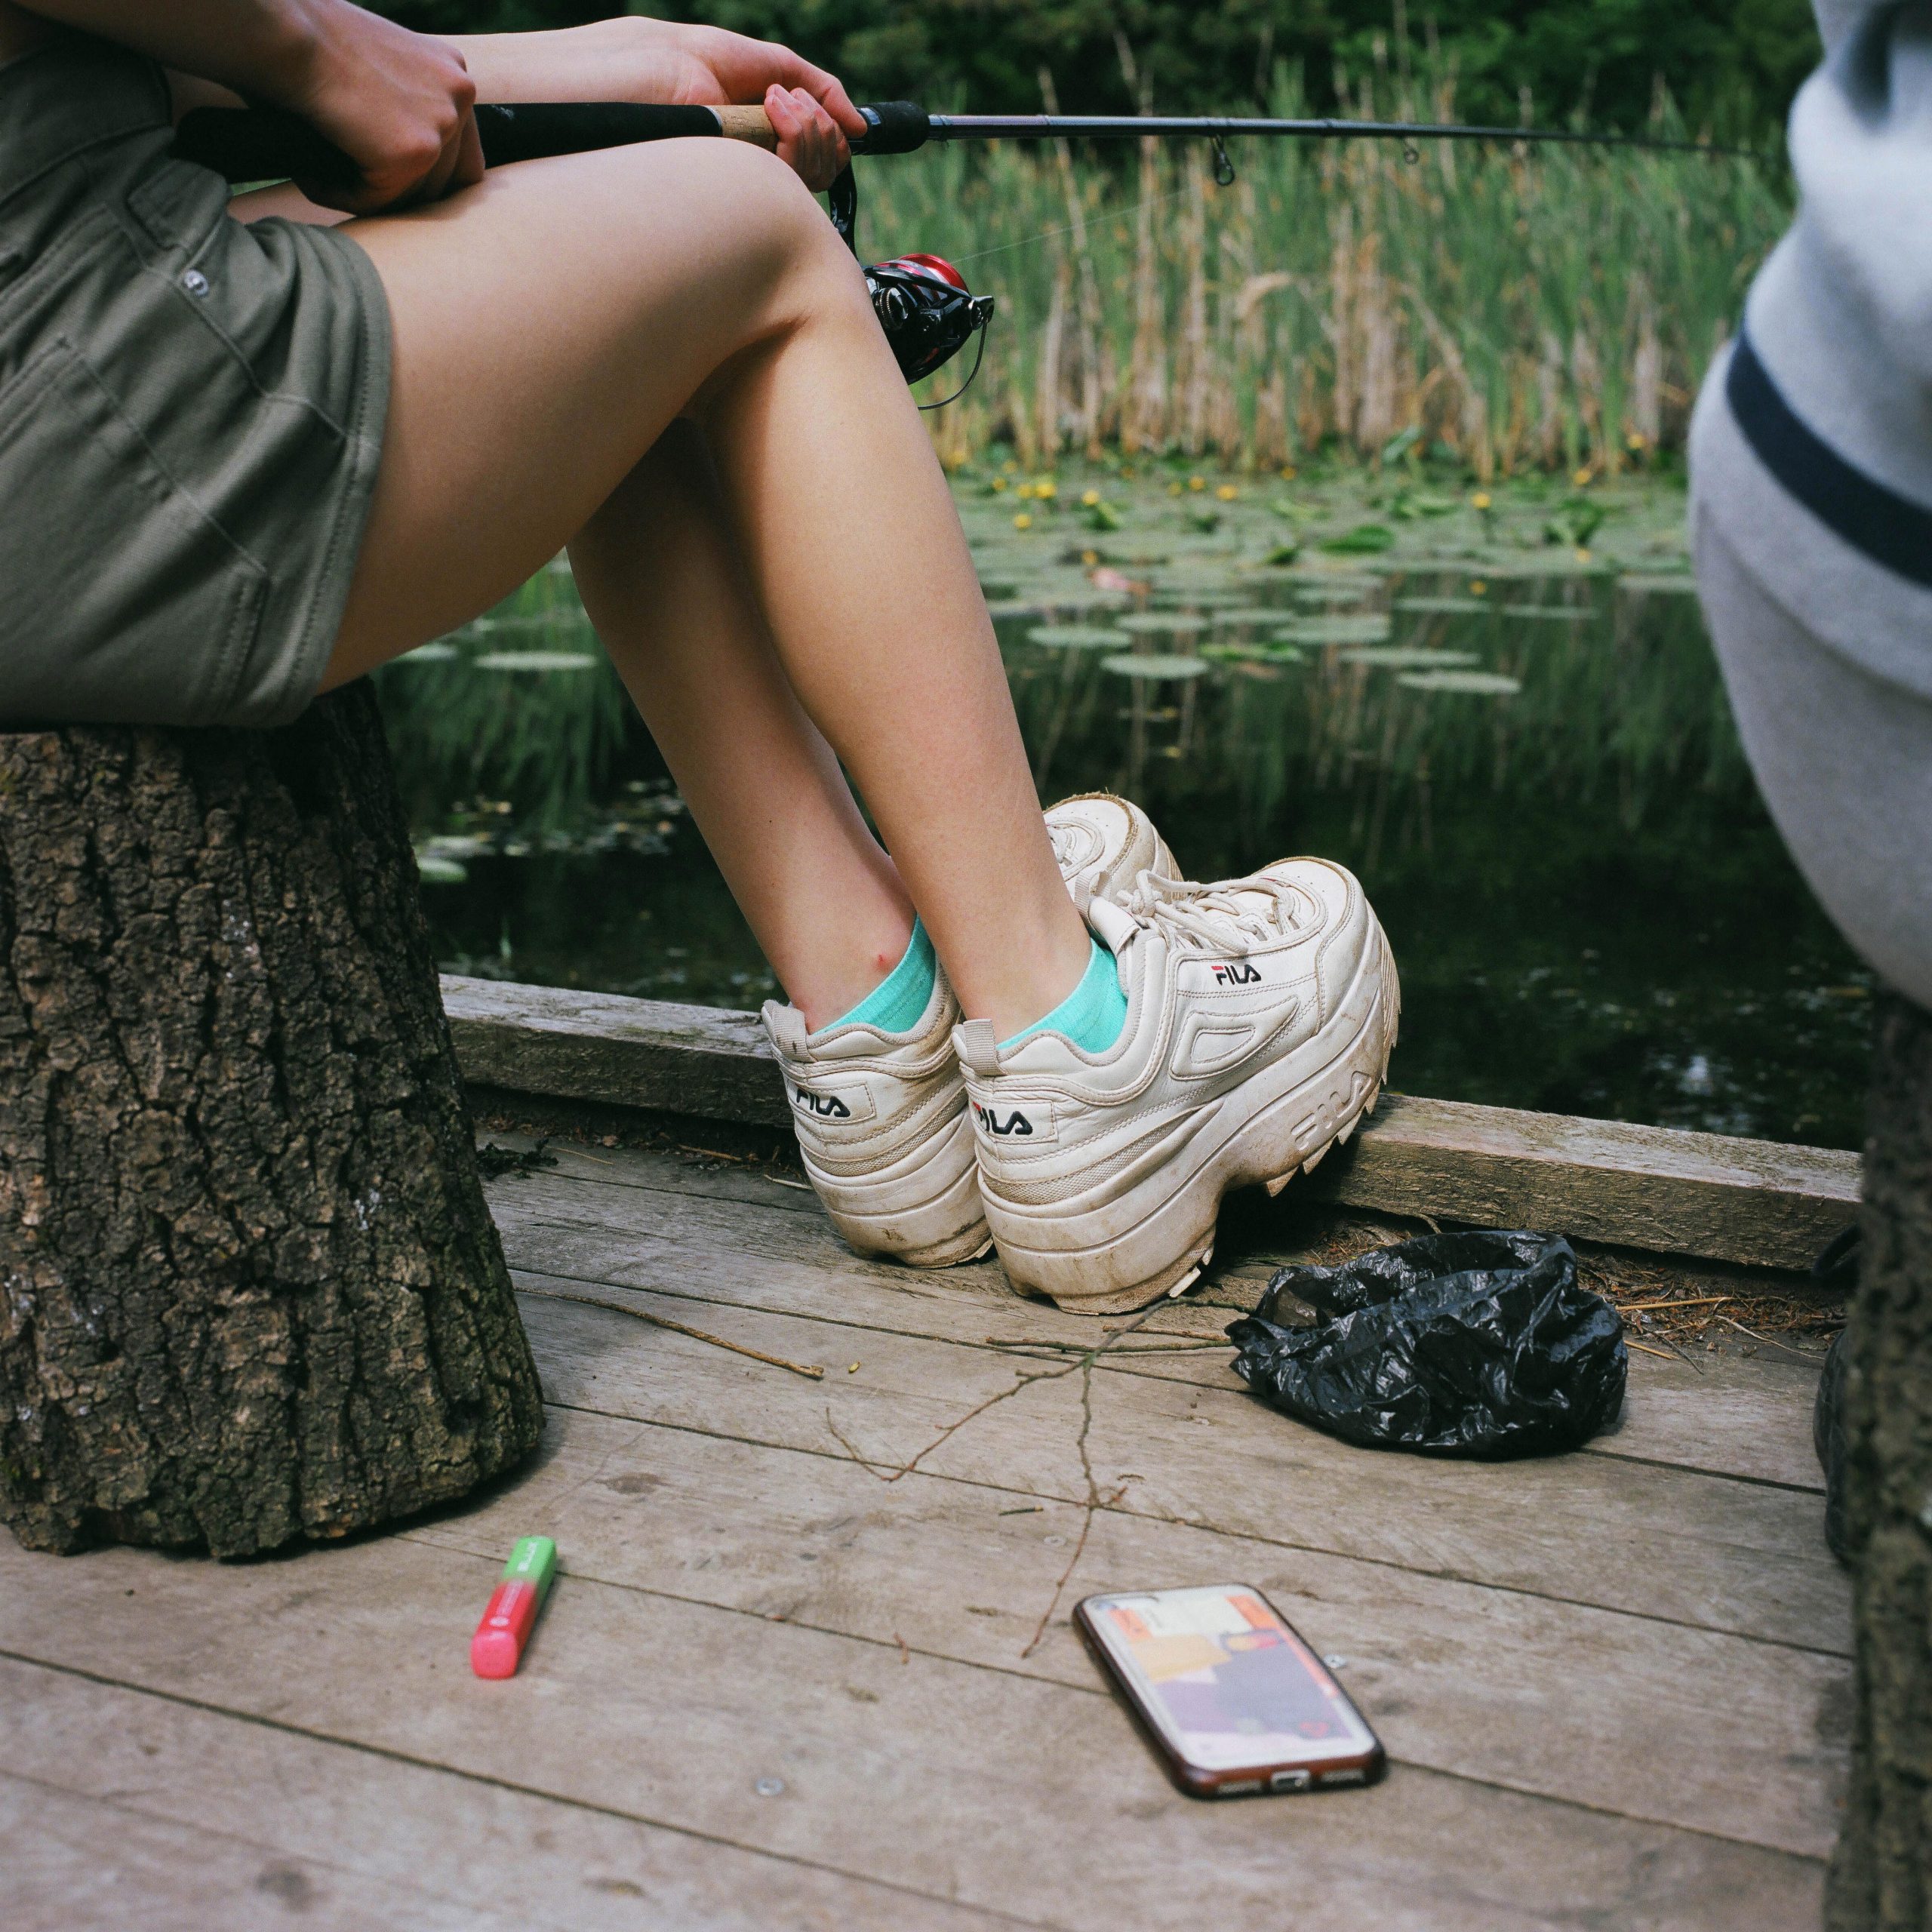 Photograph of a girl's legs and trainers as she sits fishing